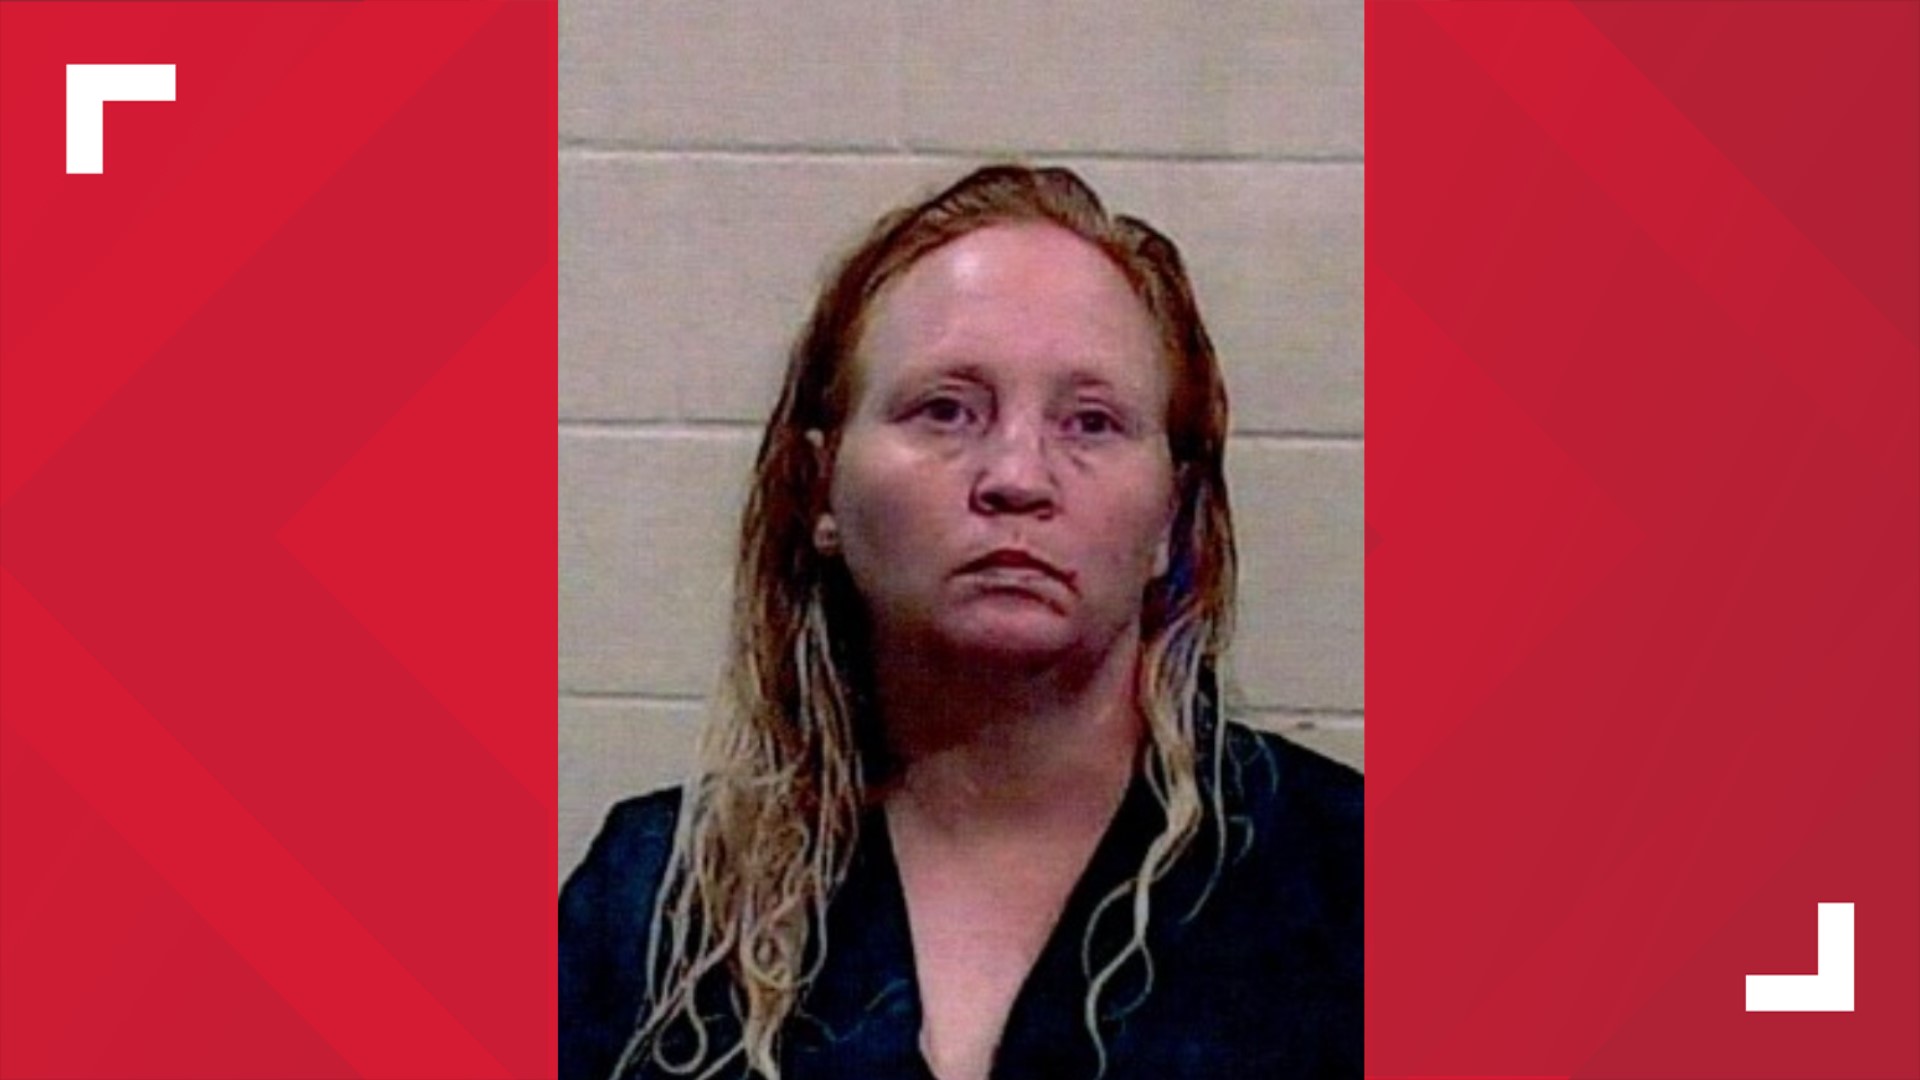 37-year-old Stephanie Tuell of Odessa has been charged with Murder.